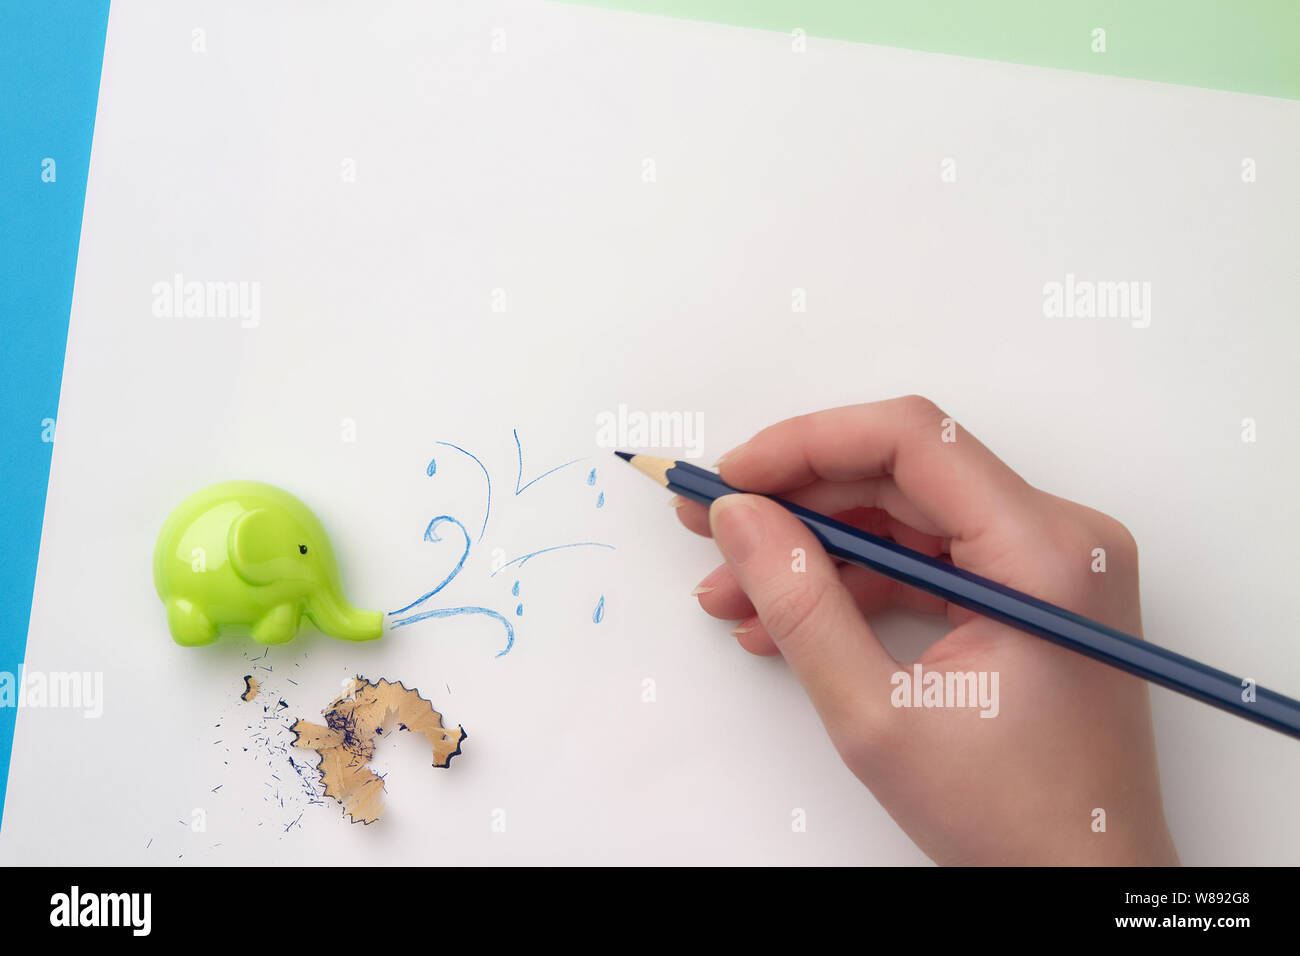 Cute children's sharpener in the form of an elephant, hand with blue pencil drawing a spray of water and a pencil filings. Flat lay Stock Photo